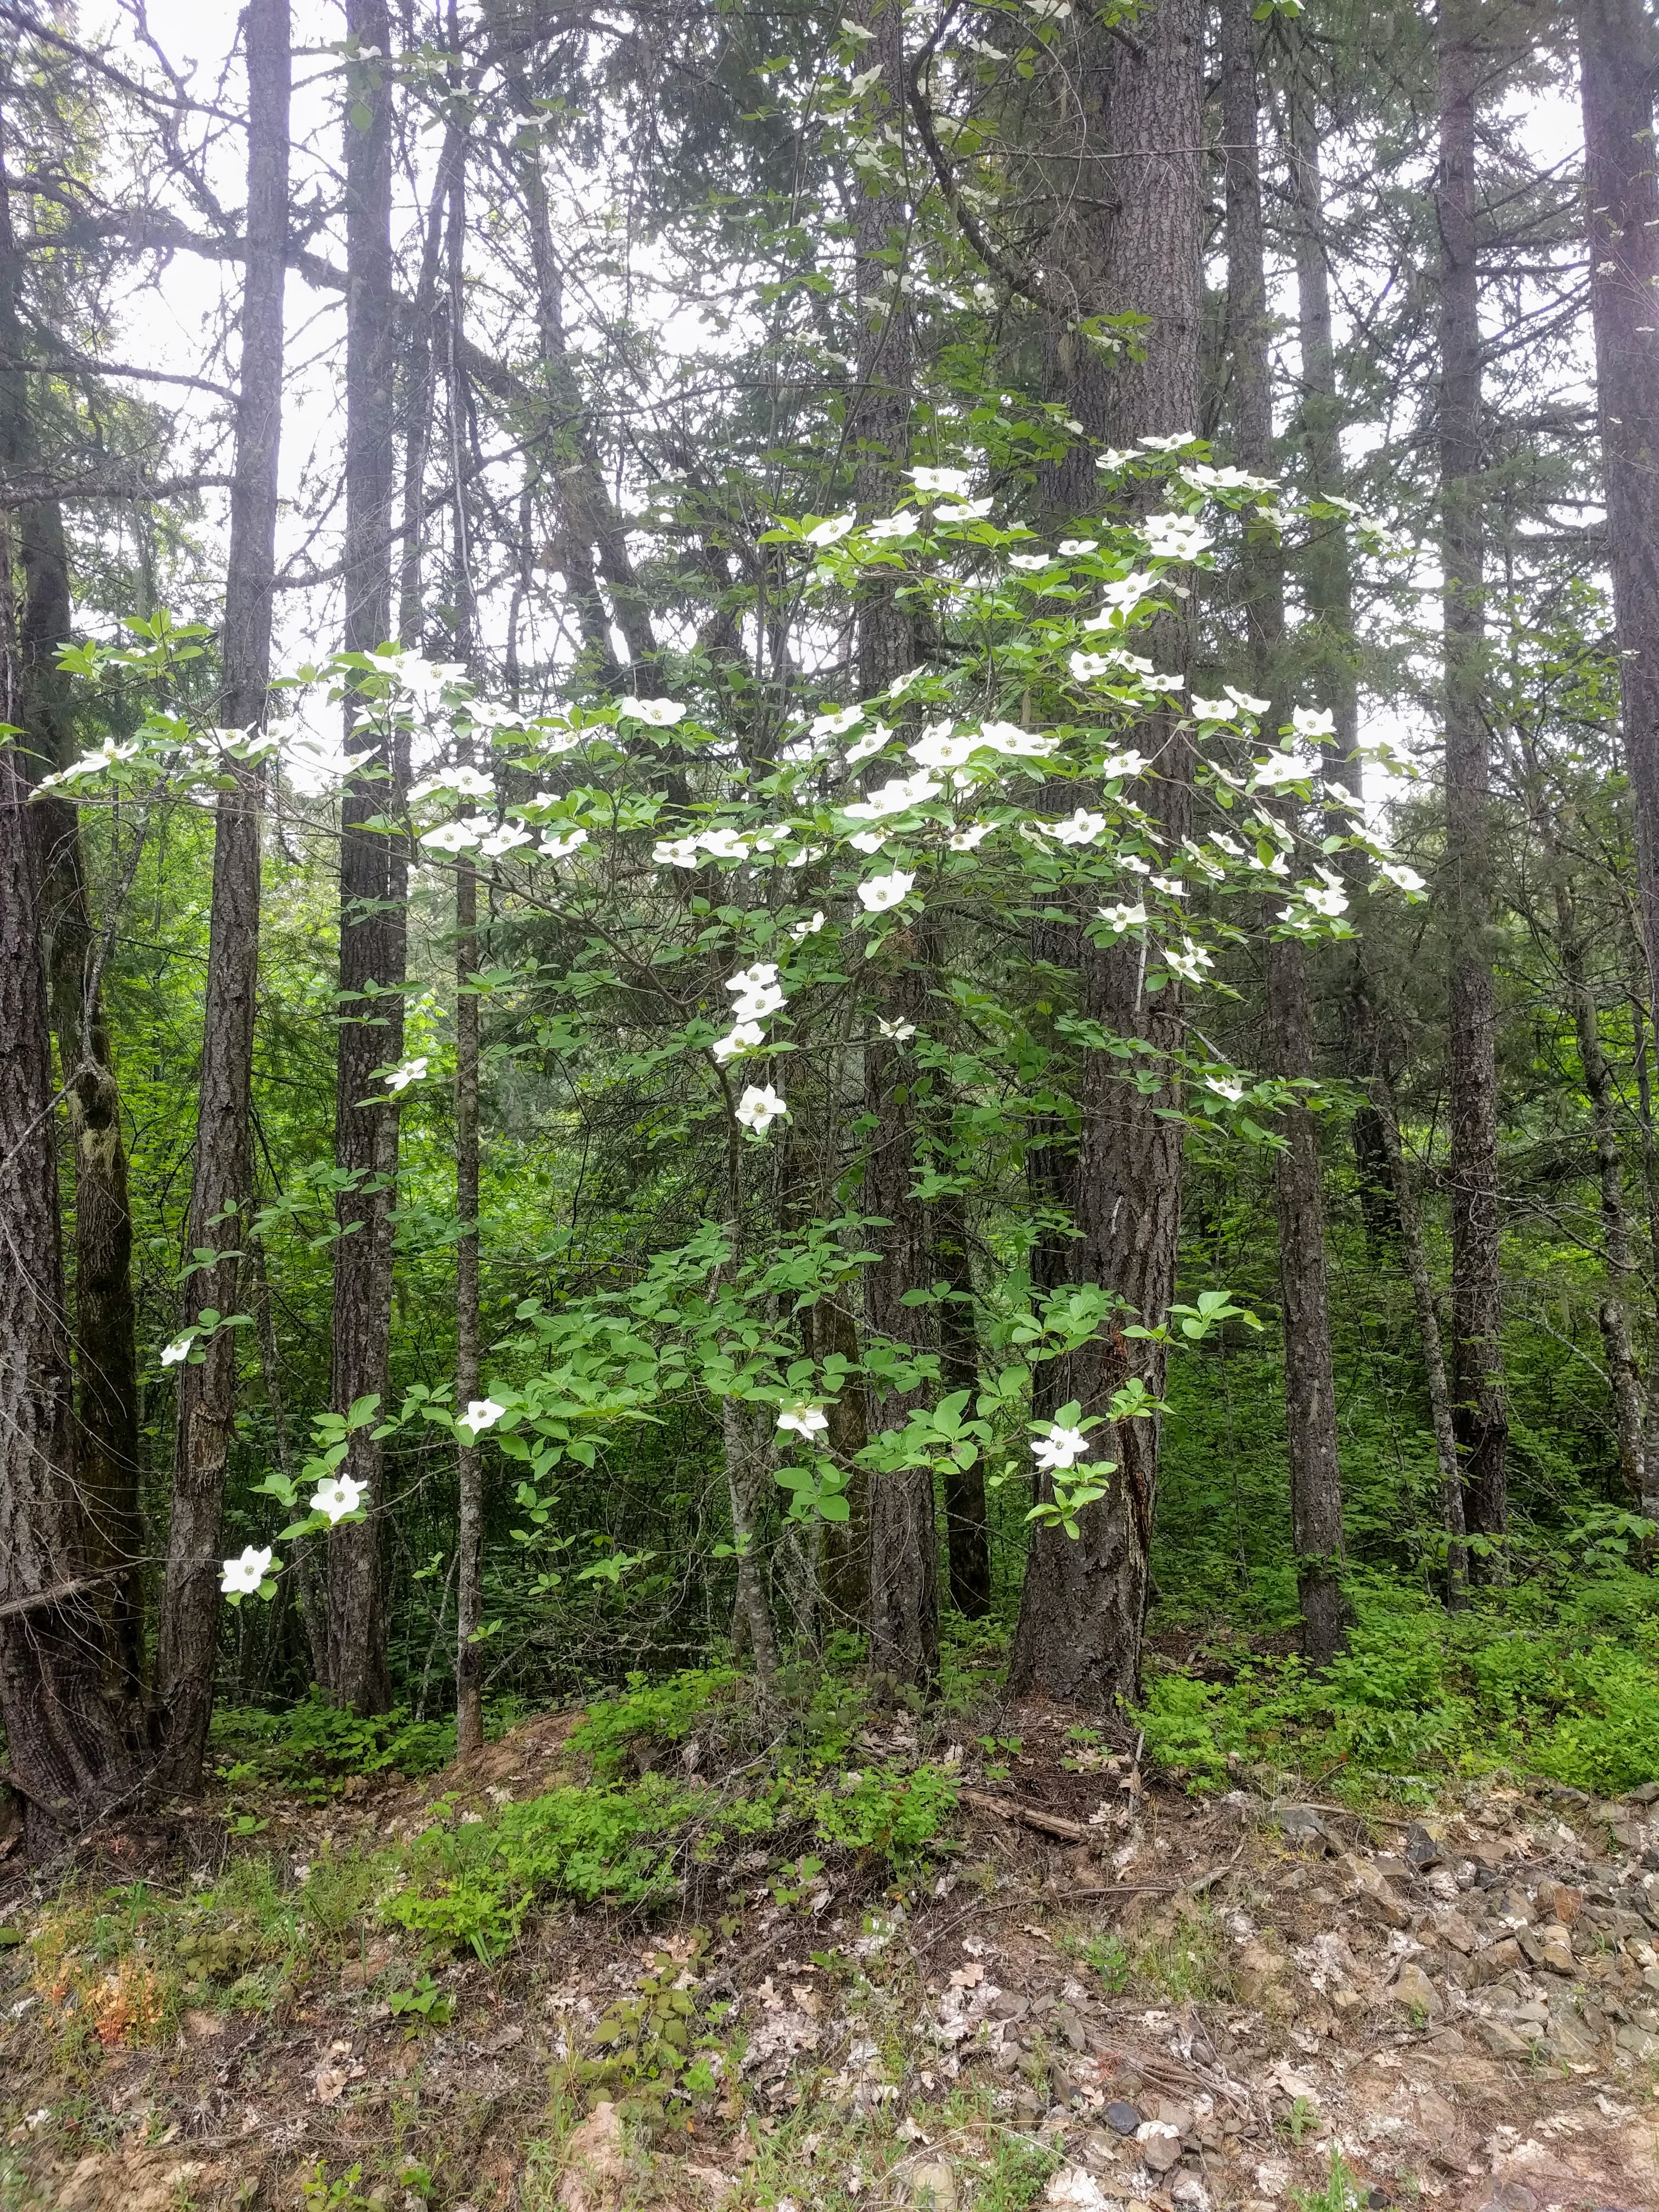 A Pacific dogwood tree in the forest. It is a small tree with white bracts.